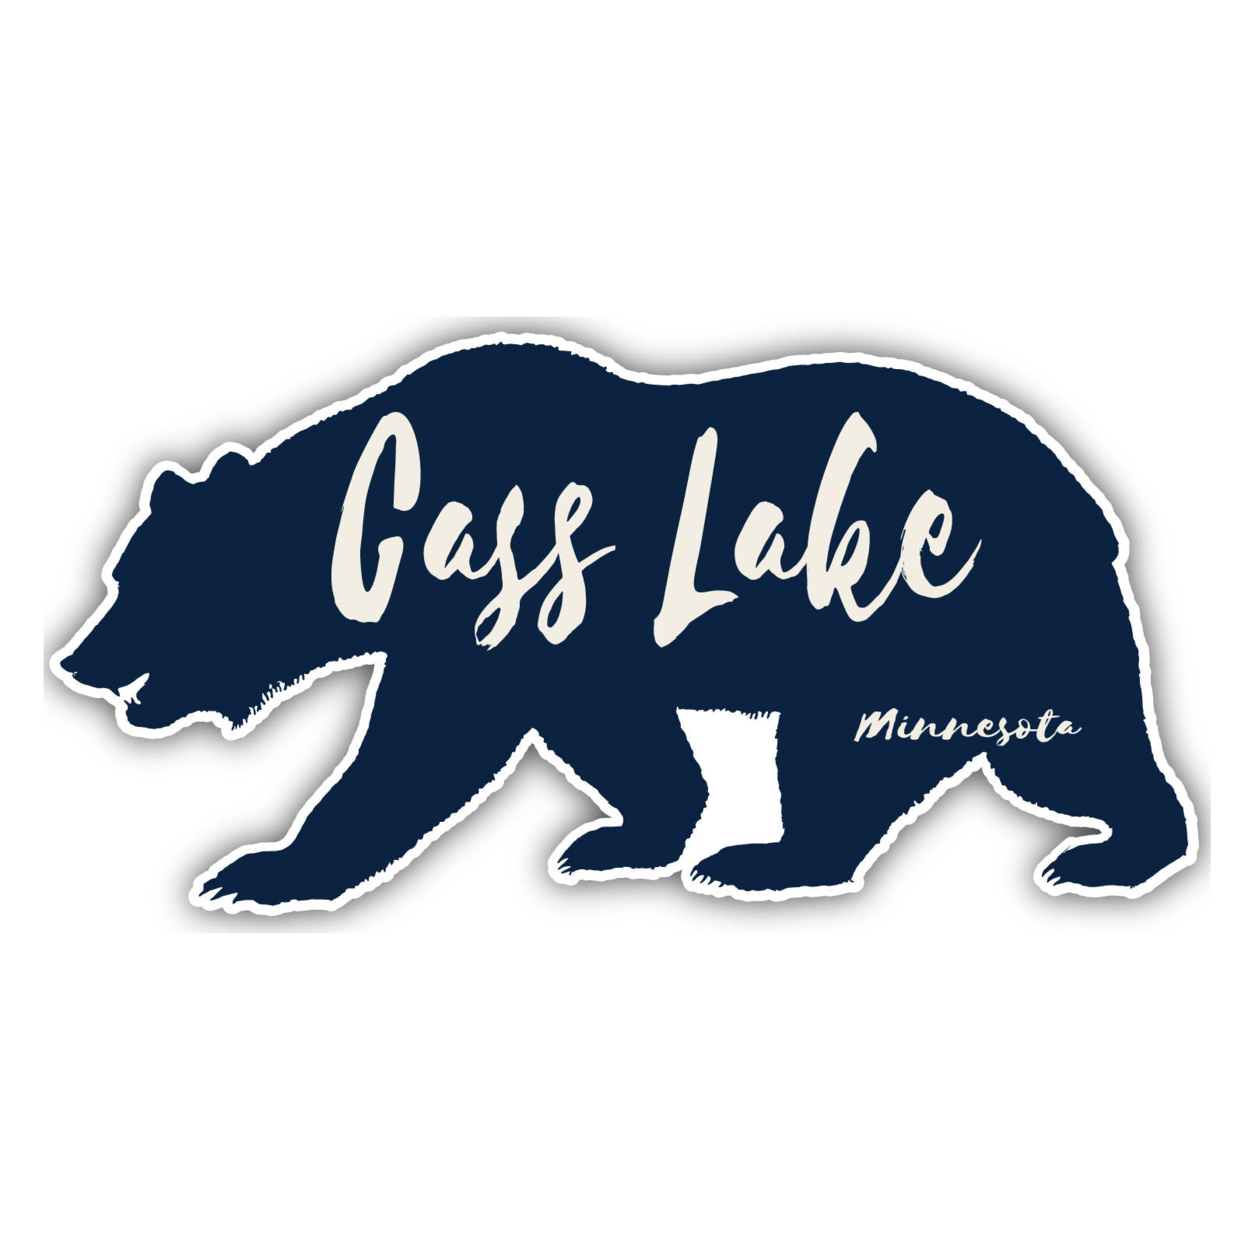 Cass Lake Minnesota Souvenir Decorative Stickers (Choose Theme And Size) - 4-Pack, 6-Inch, Camp Life